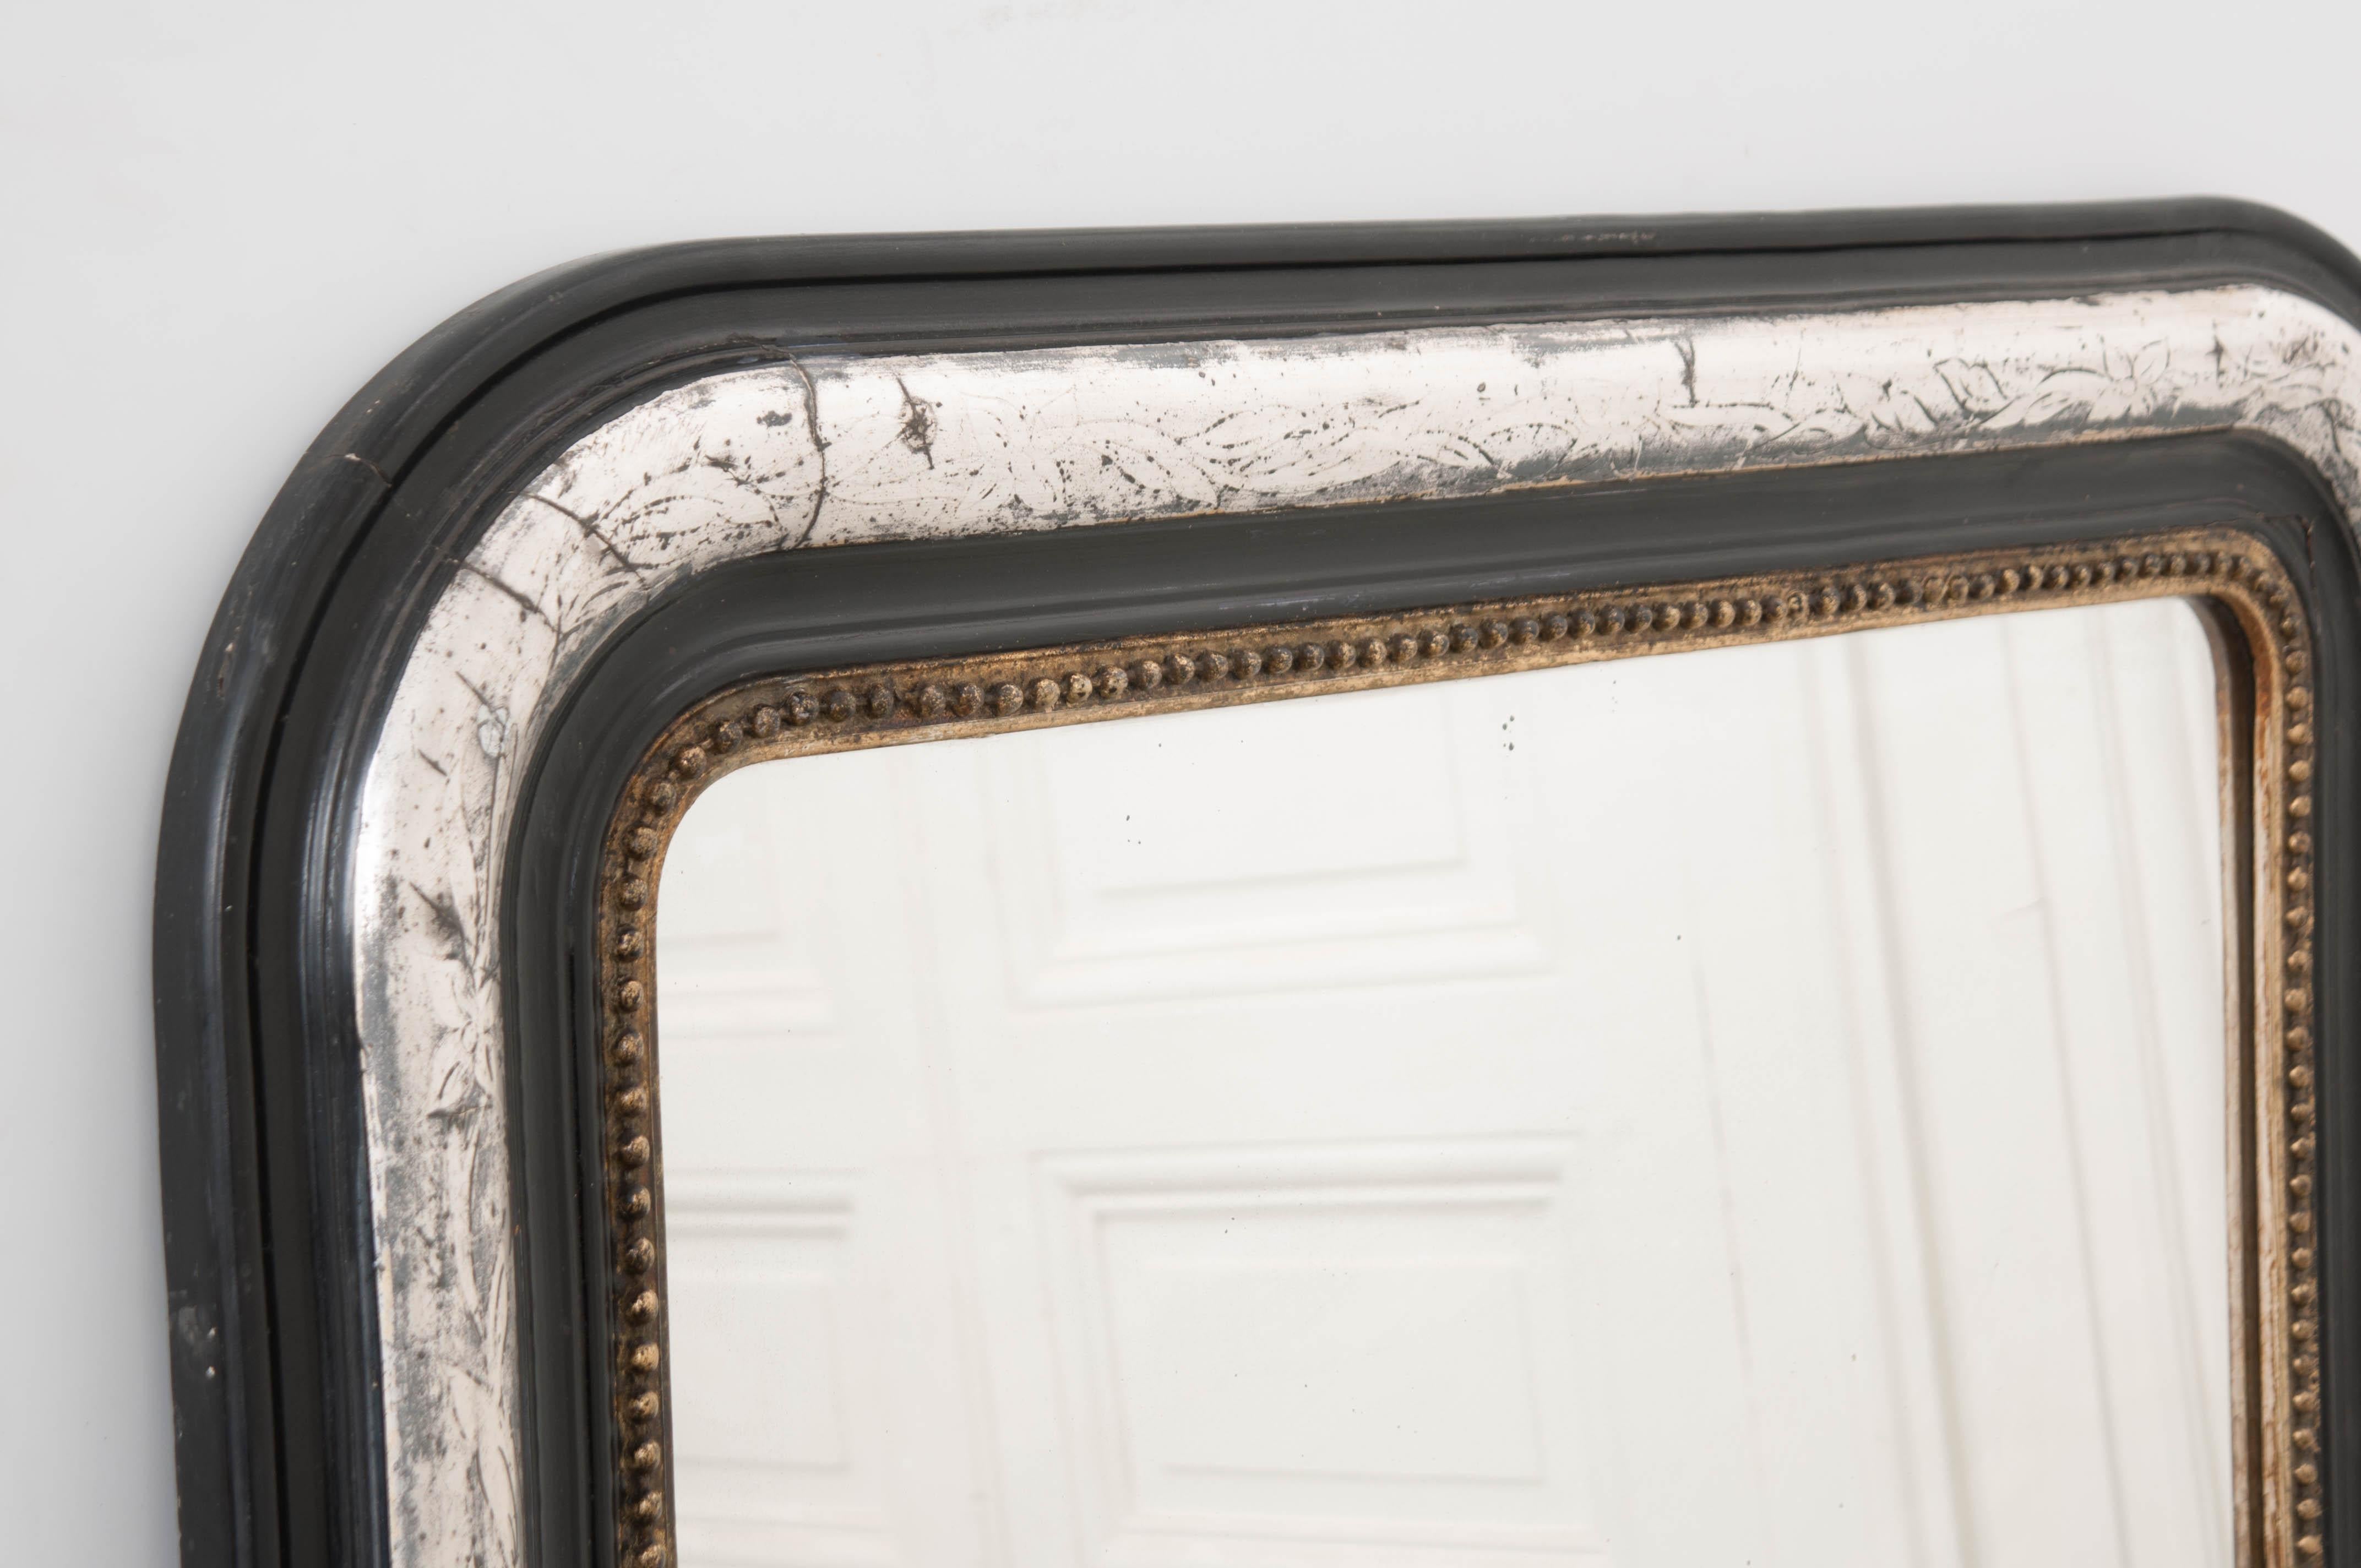 This fine period Louis Philippe ebonized and silvered mirror, circa 1840, is from France and has a fabulous patina. It features a gold-gilt beaded liner which makes it versatile enough to easily blend into any interior.